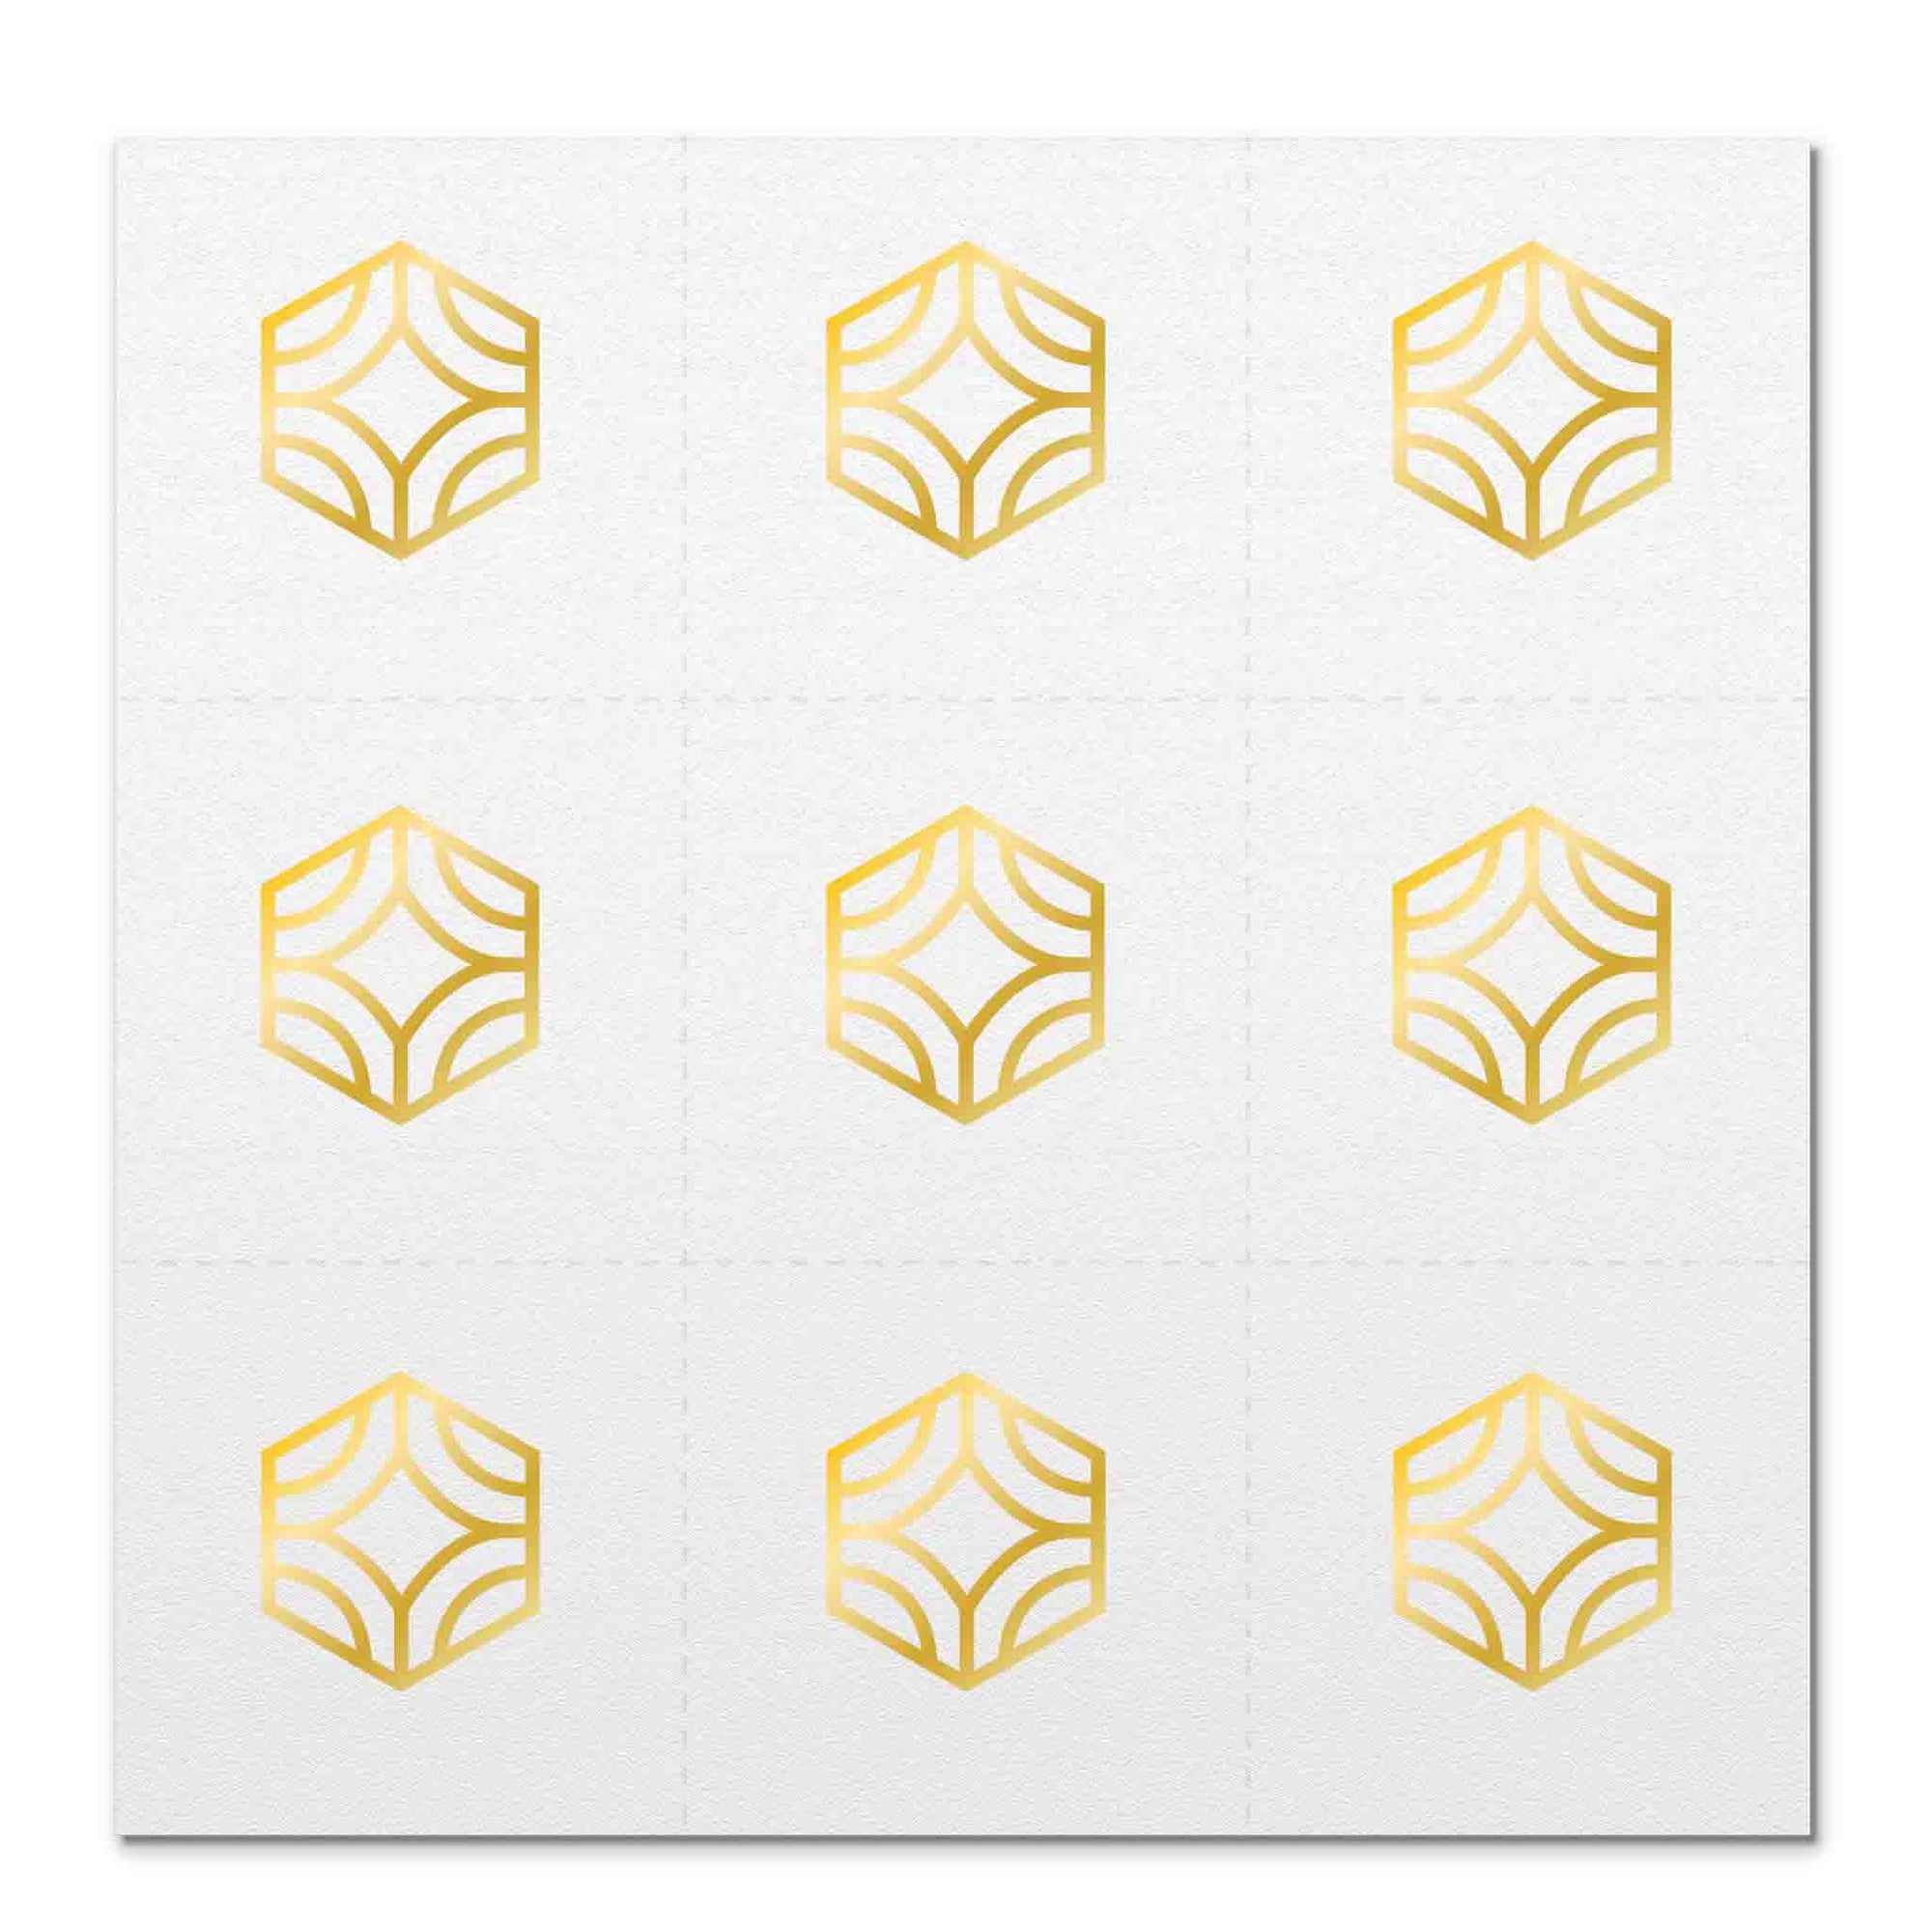 Front side page of Love (gold) mindful marks temporary mindfulness tattoo wearable reminders.